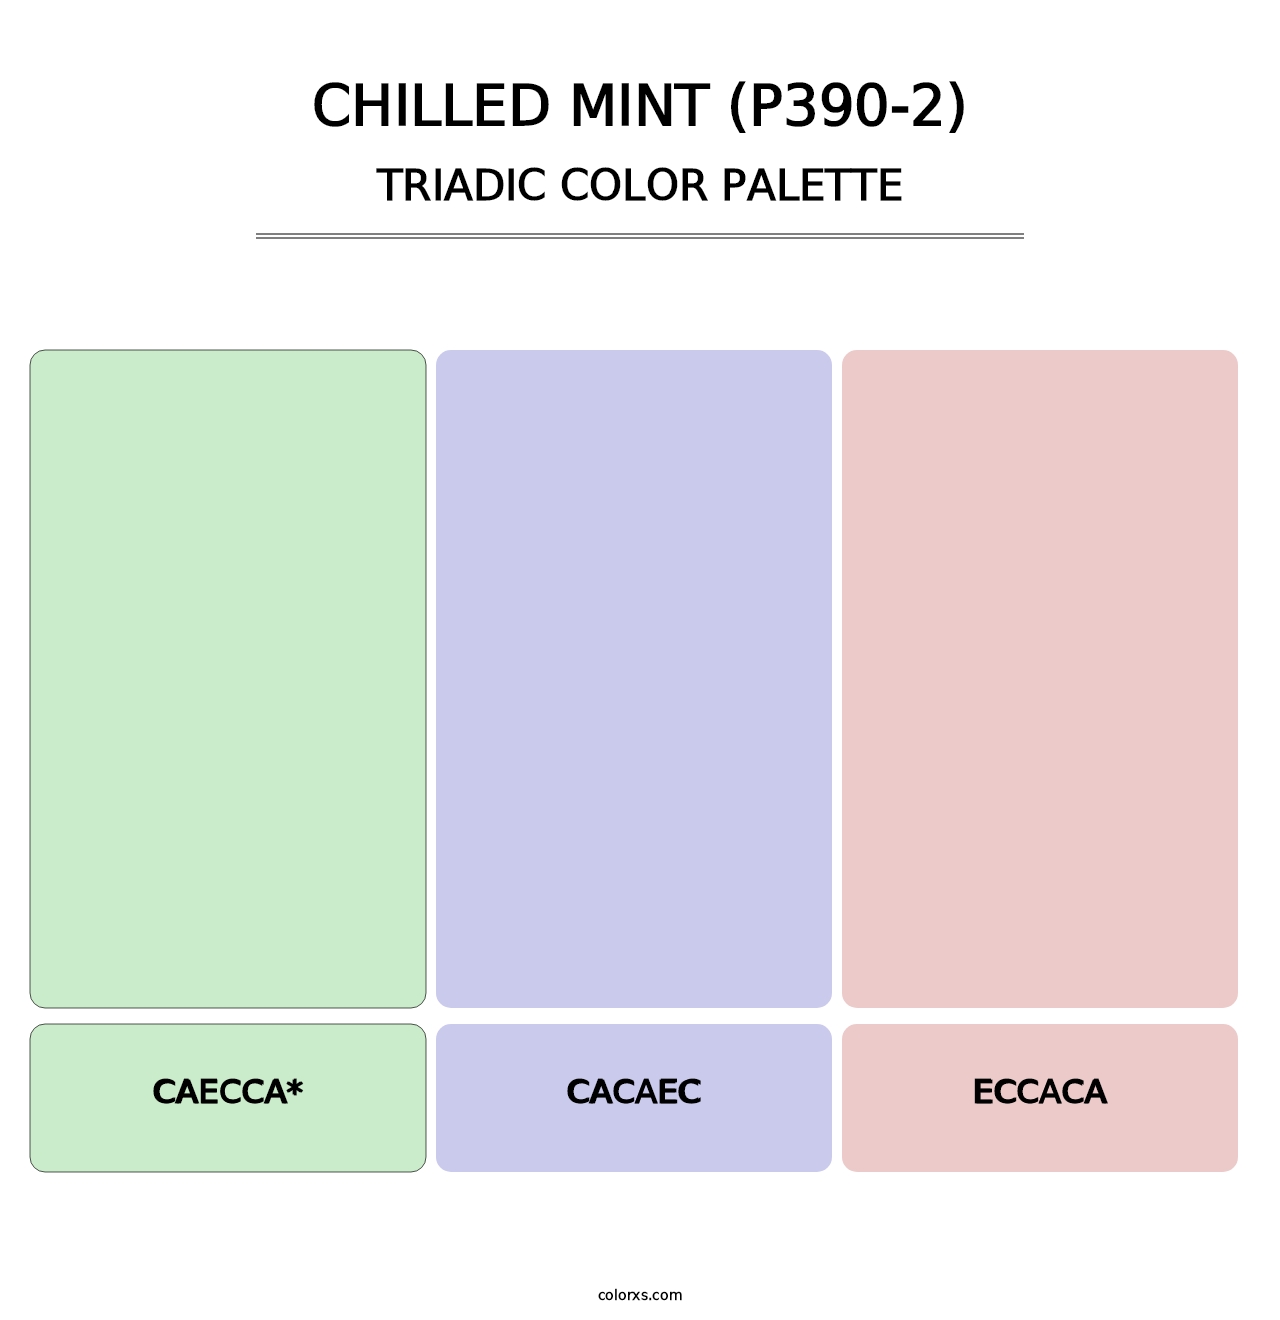 Chilled Mint (P390-2) - Triadic Color Palette